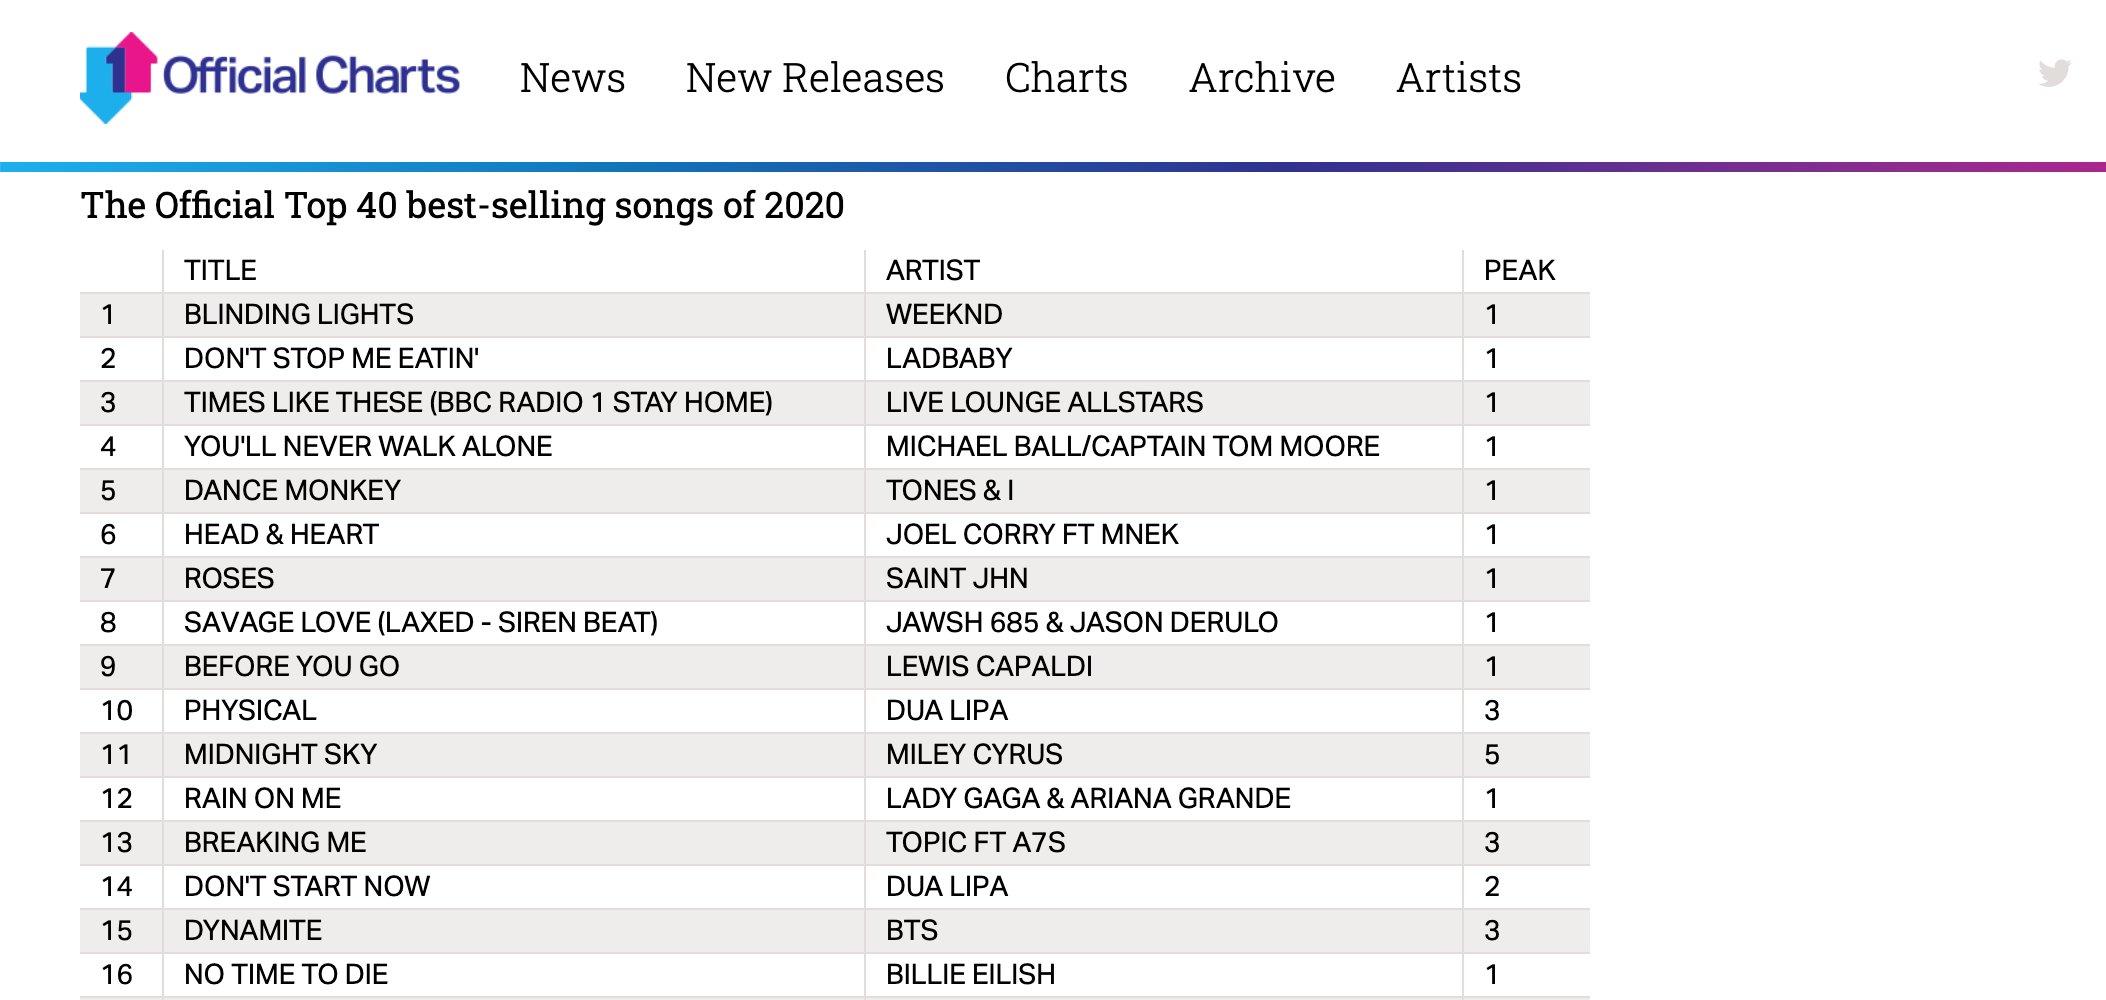 helbrede Flyve drage blande BTS Charts & Translations on Twitter: ".@BTS_twt's "Dynamite" was the 15th  best-selling song of 2020 on the UK Official Chart, and "Map of the Soul:  7" also ranks #48 on the End